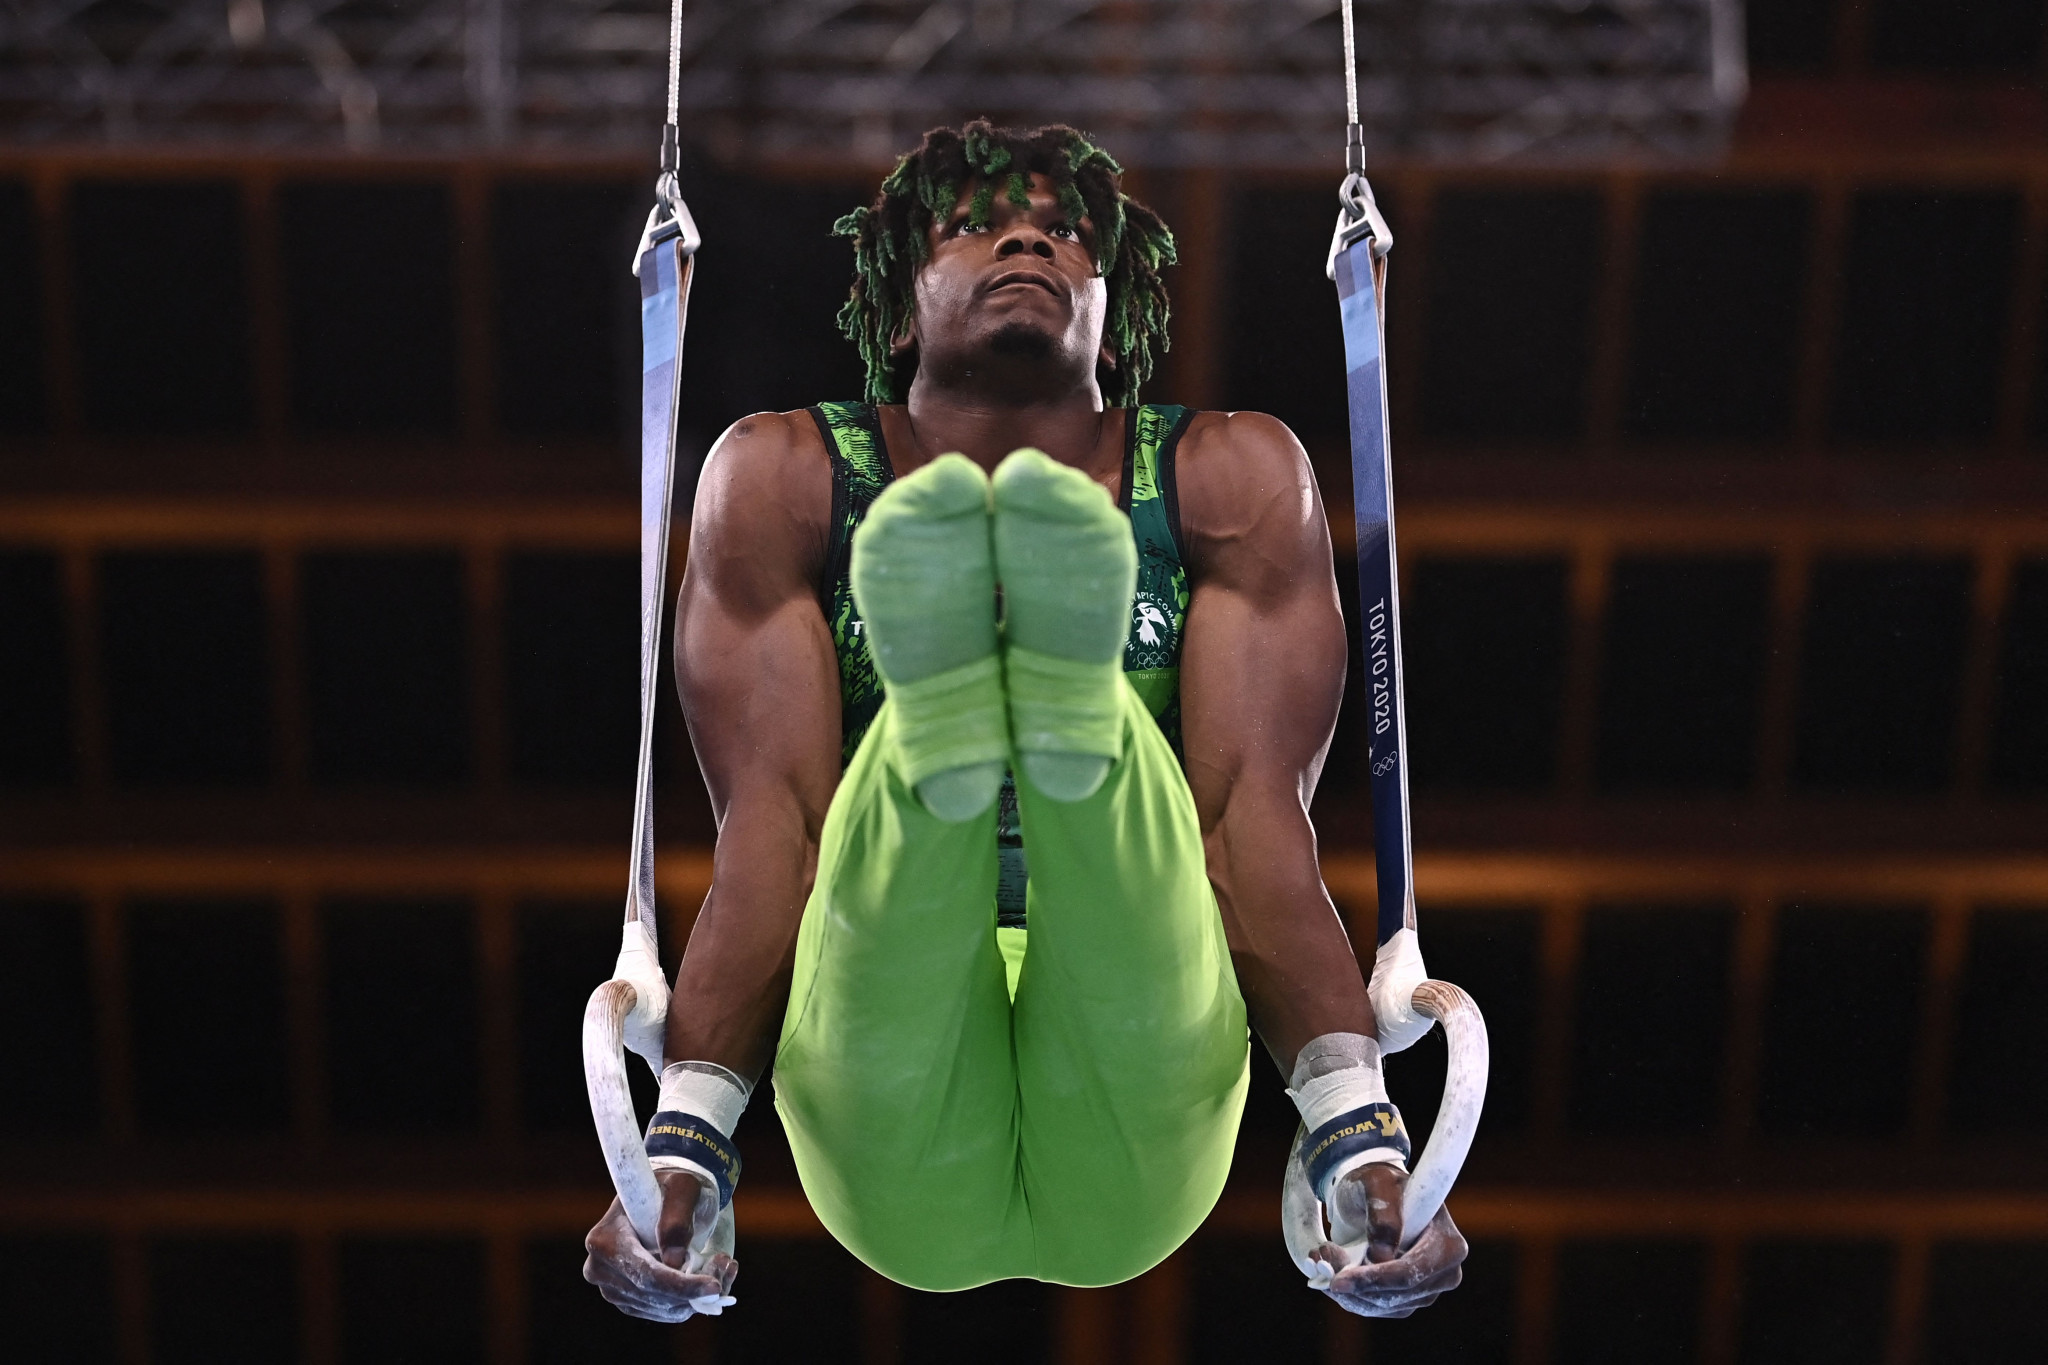 Uche Eke made history at Tokyo 2020 when he became the first Nigerian gymnast to represent Nigeria at the Olympic Games ©Getty Images